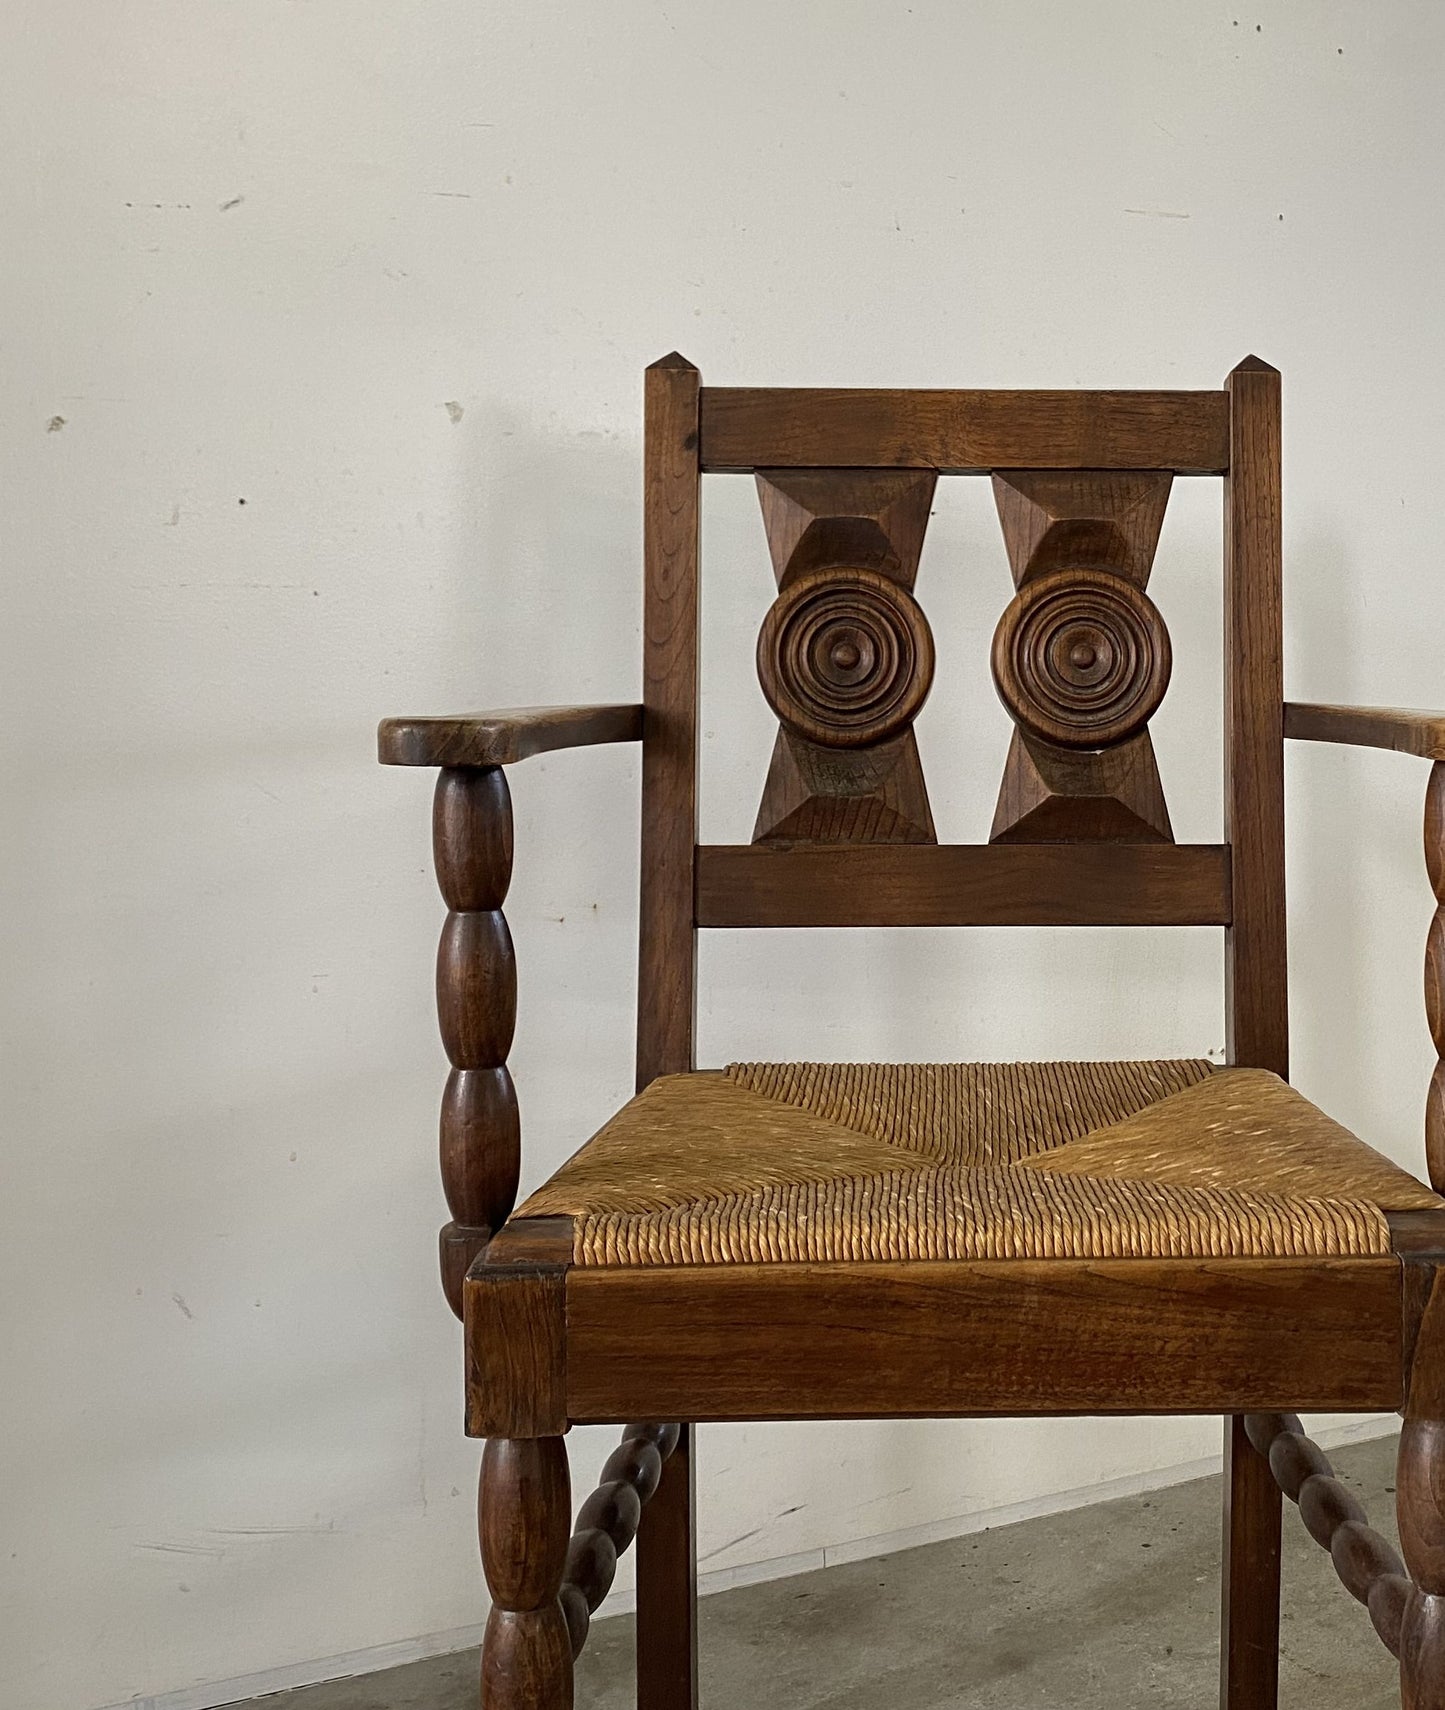 Arm Chair ”anonymous”